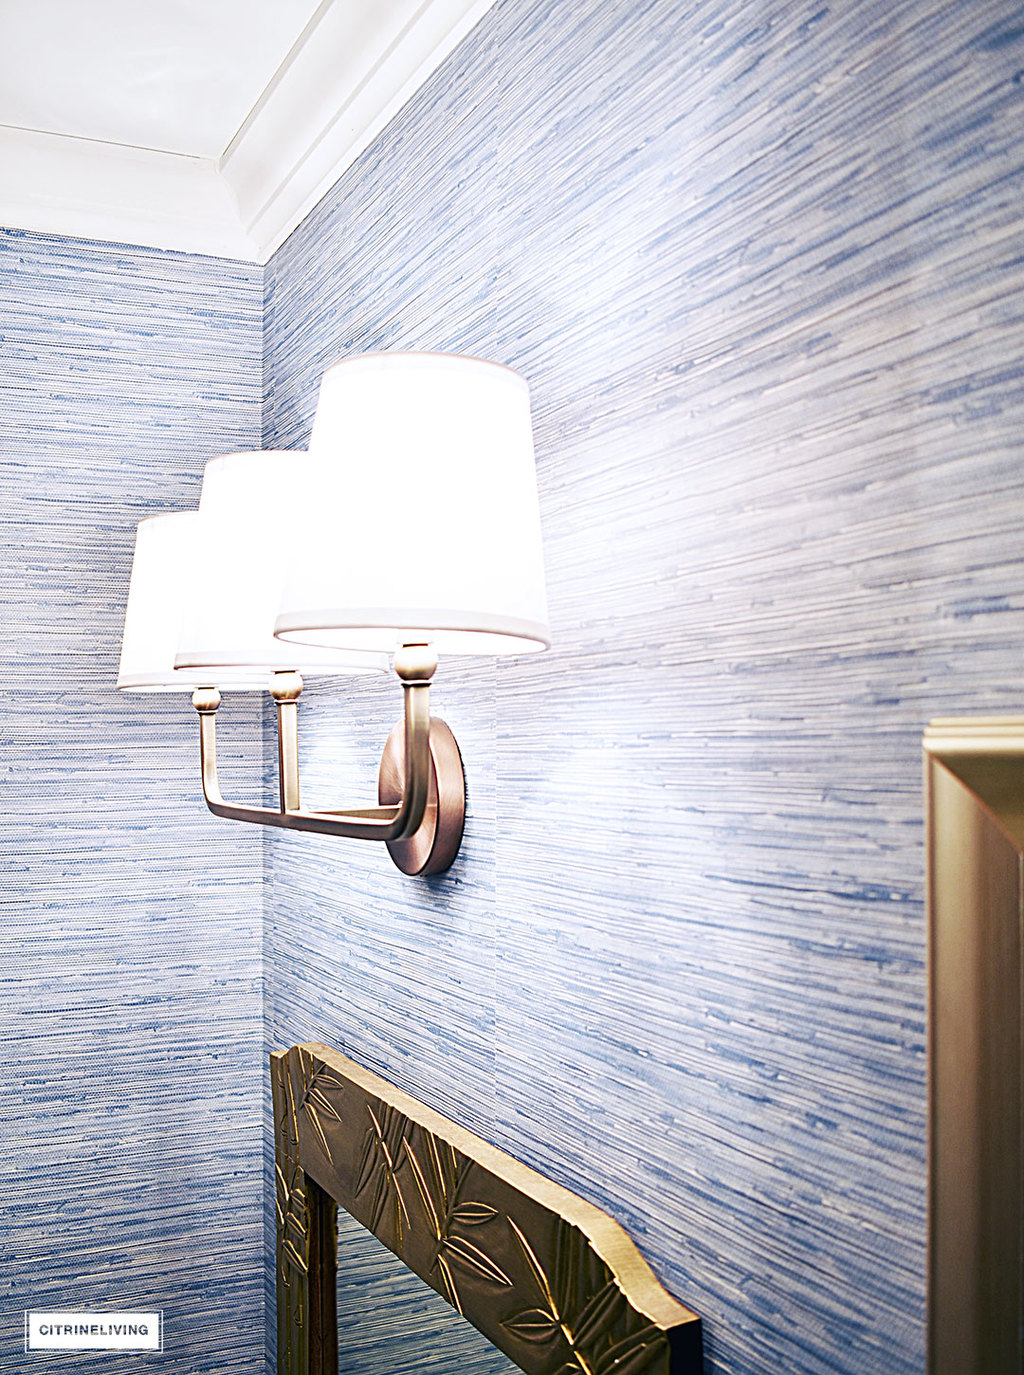 A timeless blue and white bathroom makeover featuring grasscloth, brass lighting, a blue and white striped shower curtain and blue and white accessories creates a sophisticated and elegant look in this small bath.